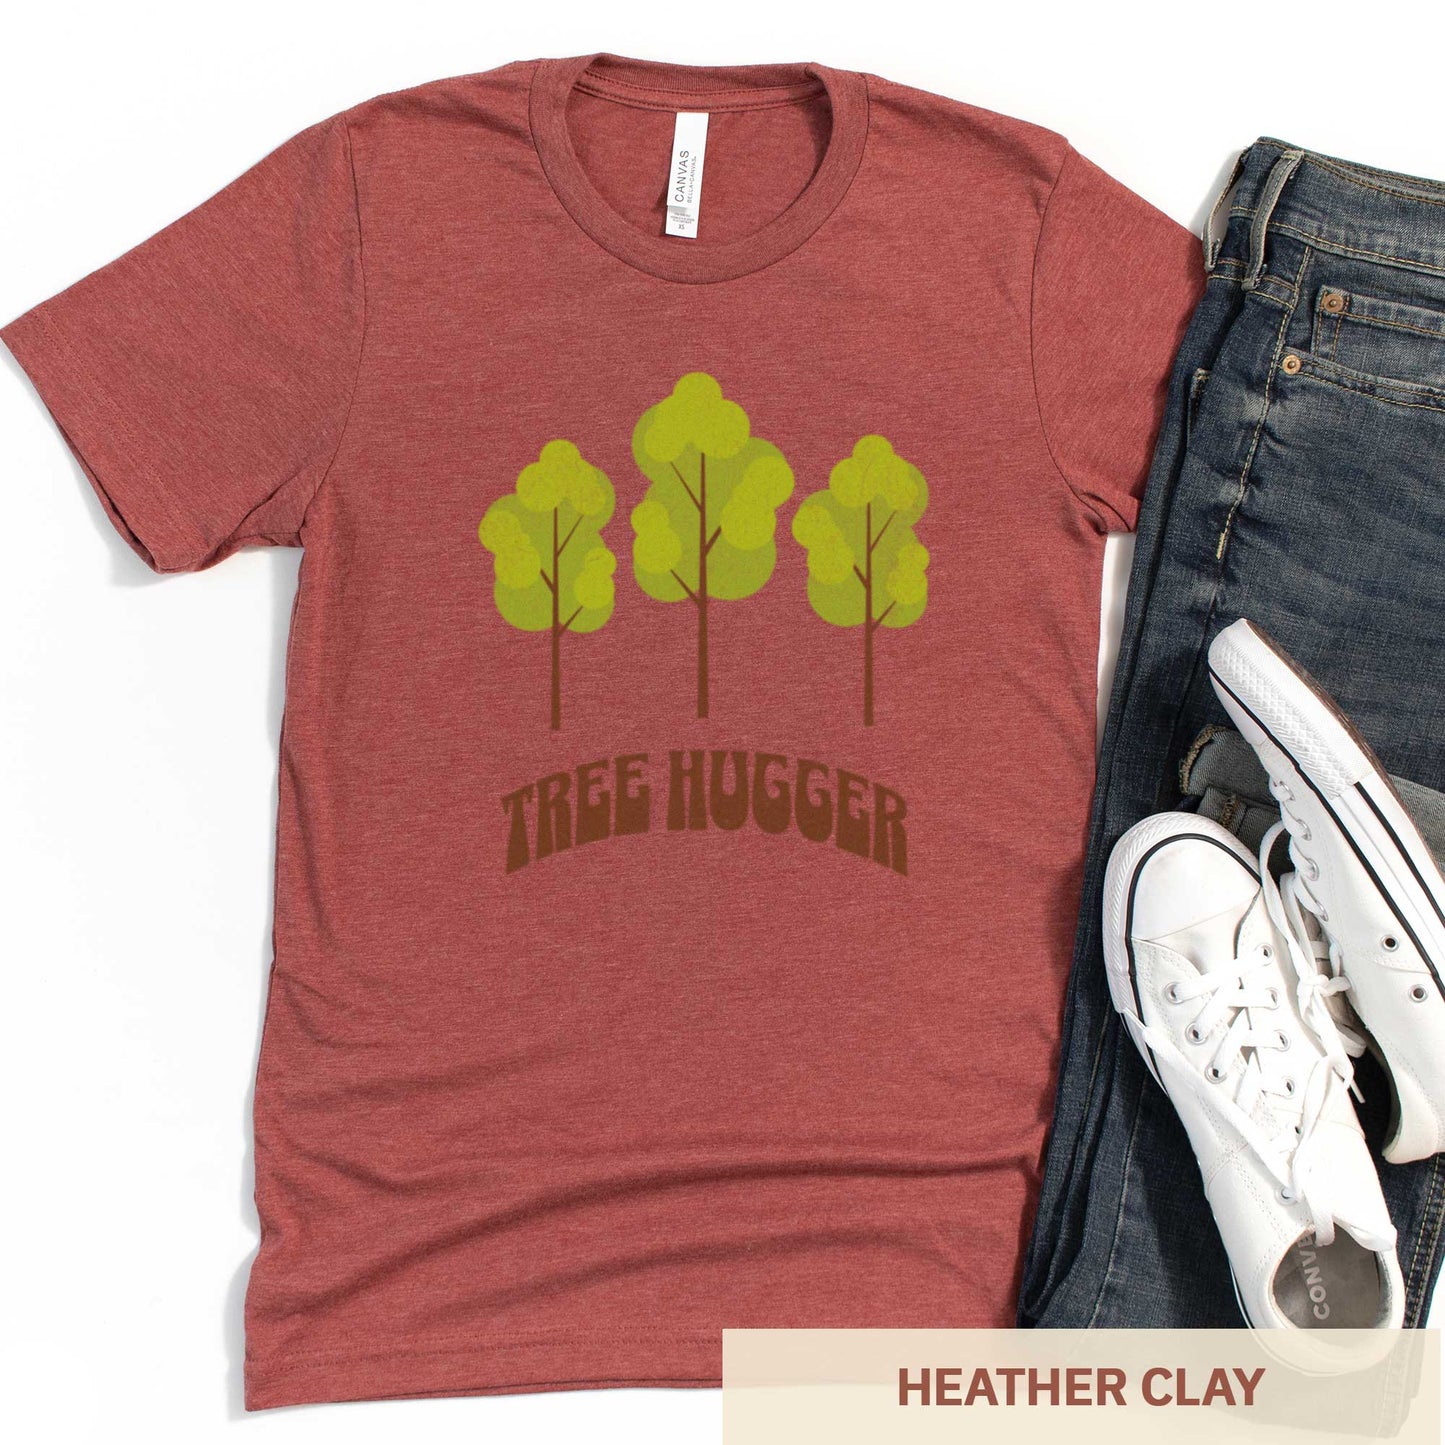 A heather clay Bella Canvas t-shirt featuring three trees and the words tree hugger.